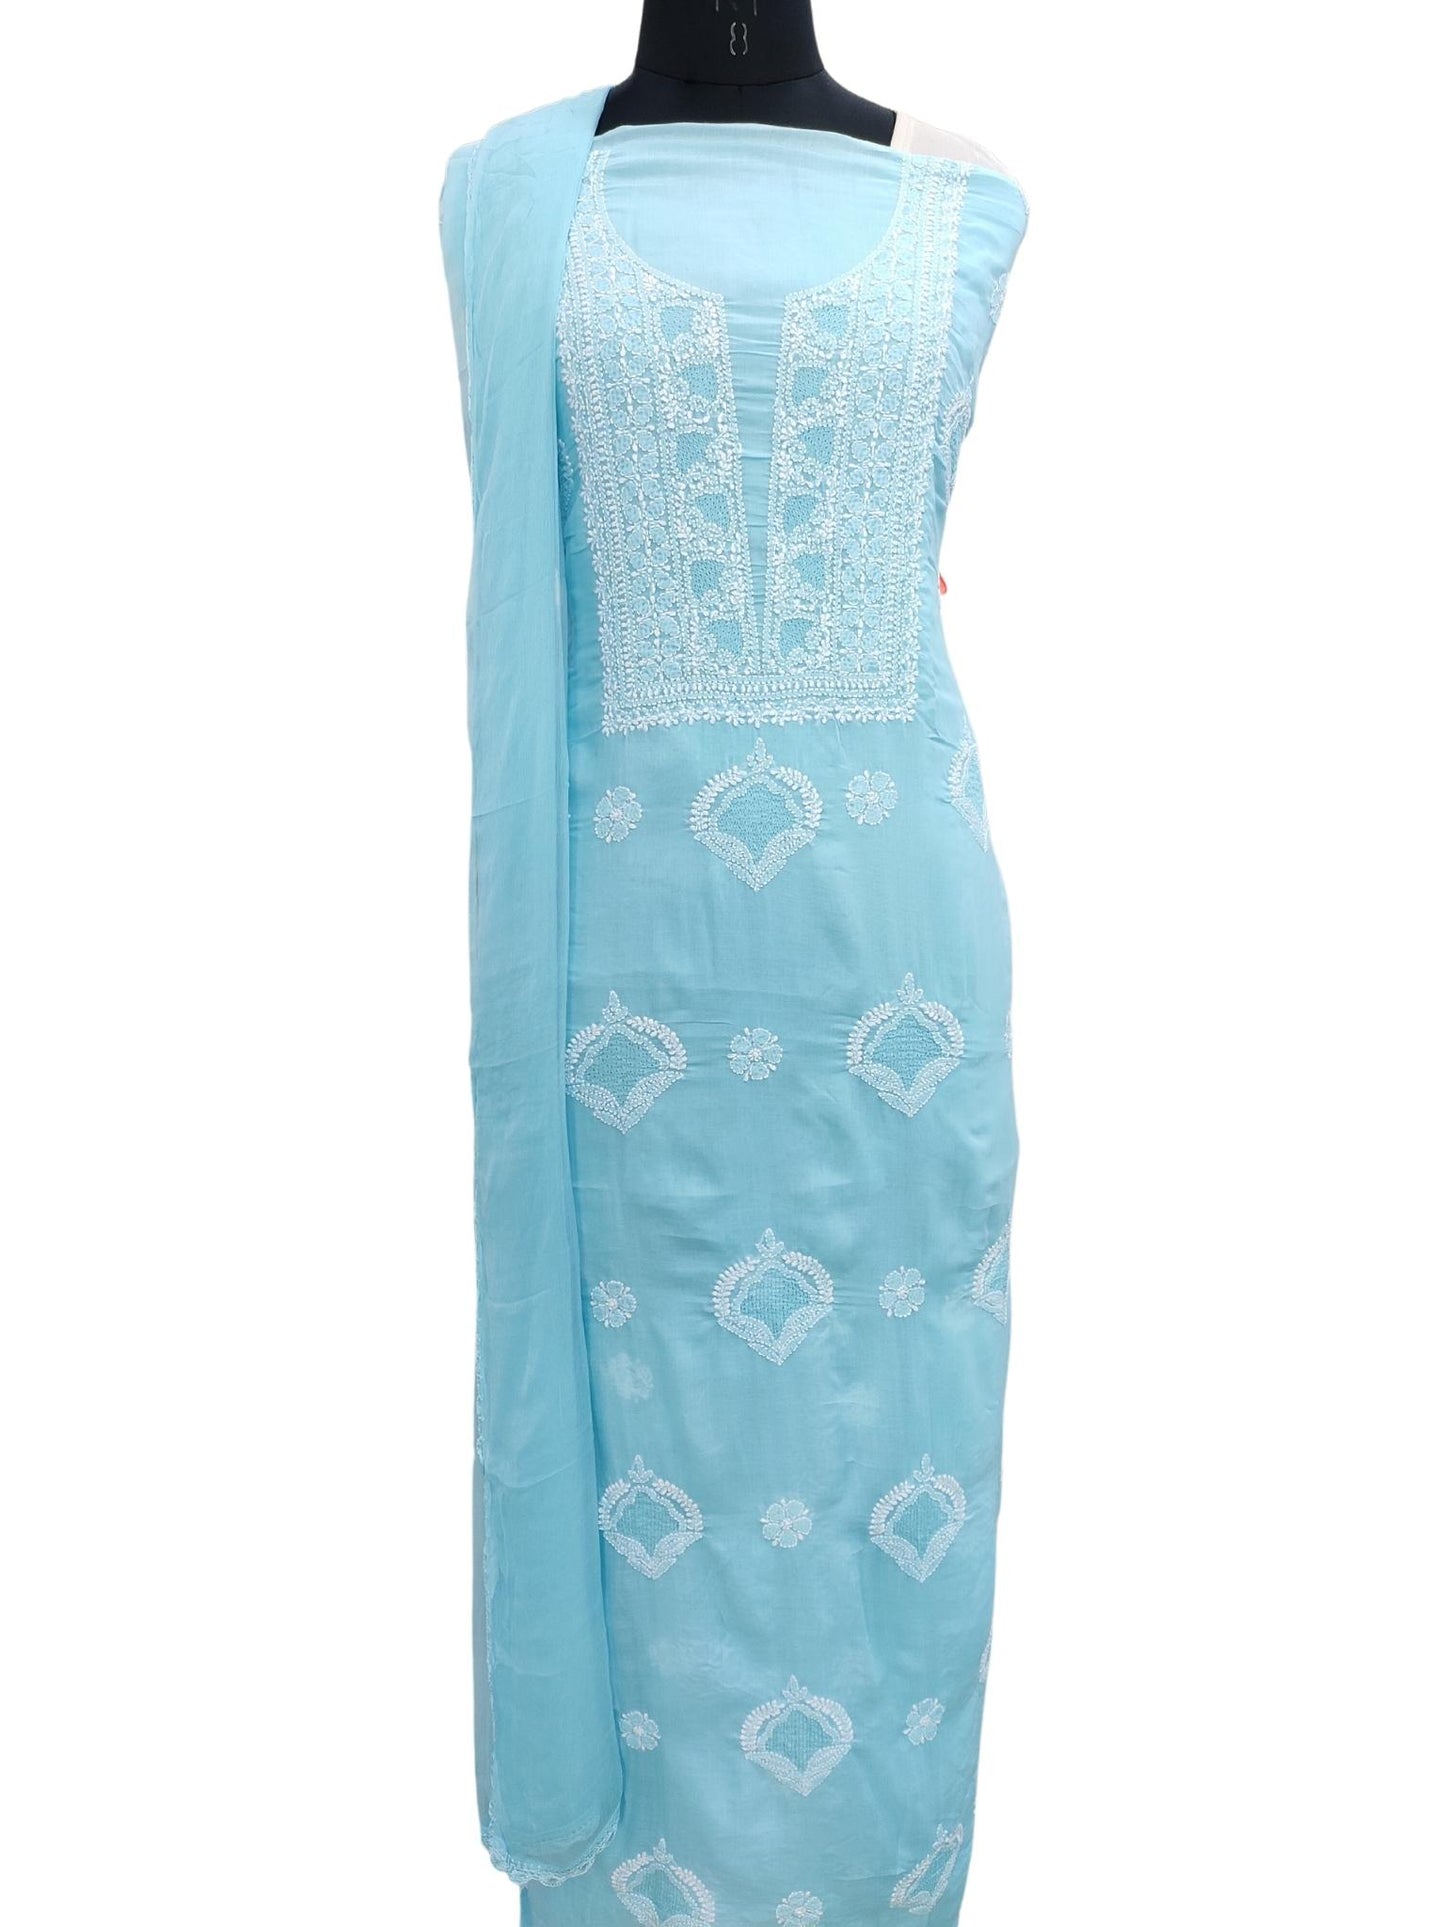 Shyamal Chikan Hand Embroidered Blue Cotton All-Over Lucknowi Chikankari Unstitched Suit Piece With Jaali Work - S18222